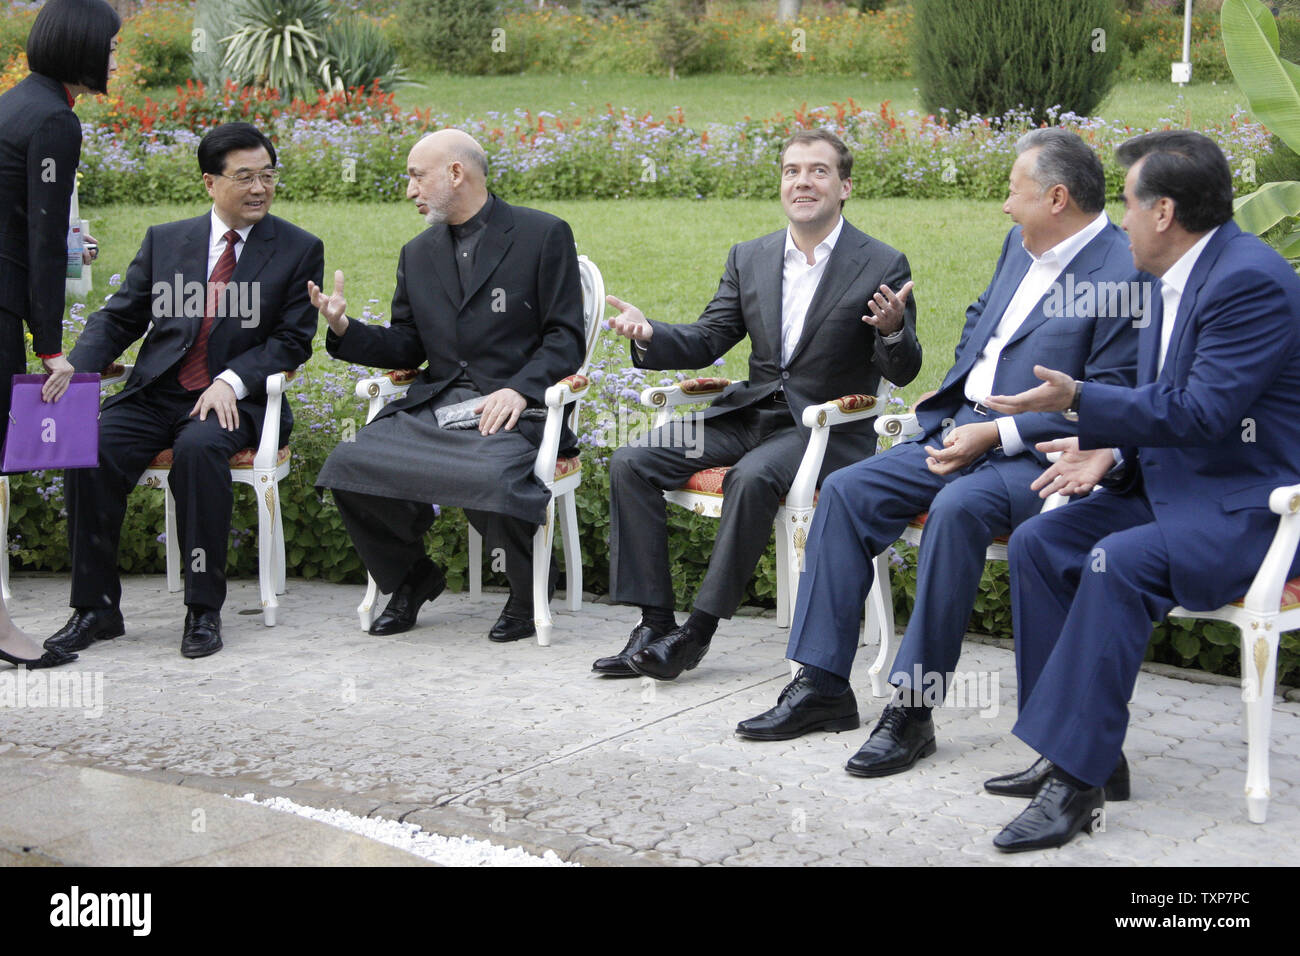 Russian President Dmitry Medvedev (C) attends a summit of the Shanghai Cooperation Organisation in Dushanbe, Tajikistan, on August 27, 2008. (L-R) Chinese President Hu Jintao, Afghan counterpart Hamid Karzai, Russian President Medvedev, Kyrgyz President Kurmanbek Bakiyev and Tajik President Emomali Rakhmon. President Medvedev discussed the crisis in Georgia with Chinese counterpart Hu Jintao on Wednesday, as Moscow looked to bolster support in its diplomatic stand-off with the West. (UPI Photo/Anatoli Zhdanov) Stock Photo